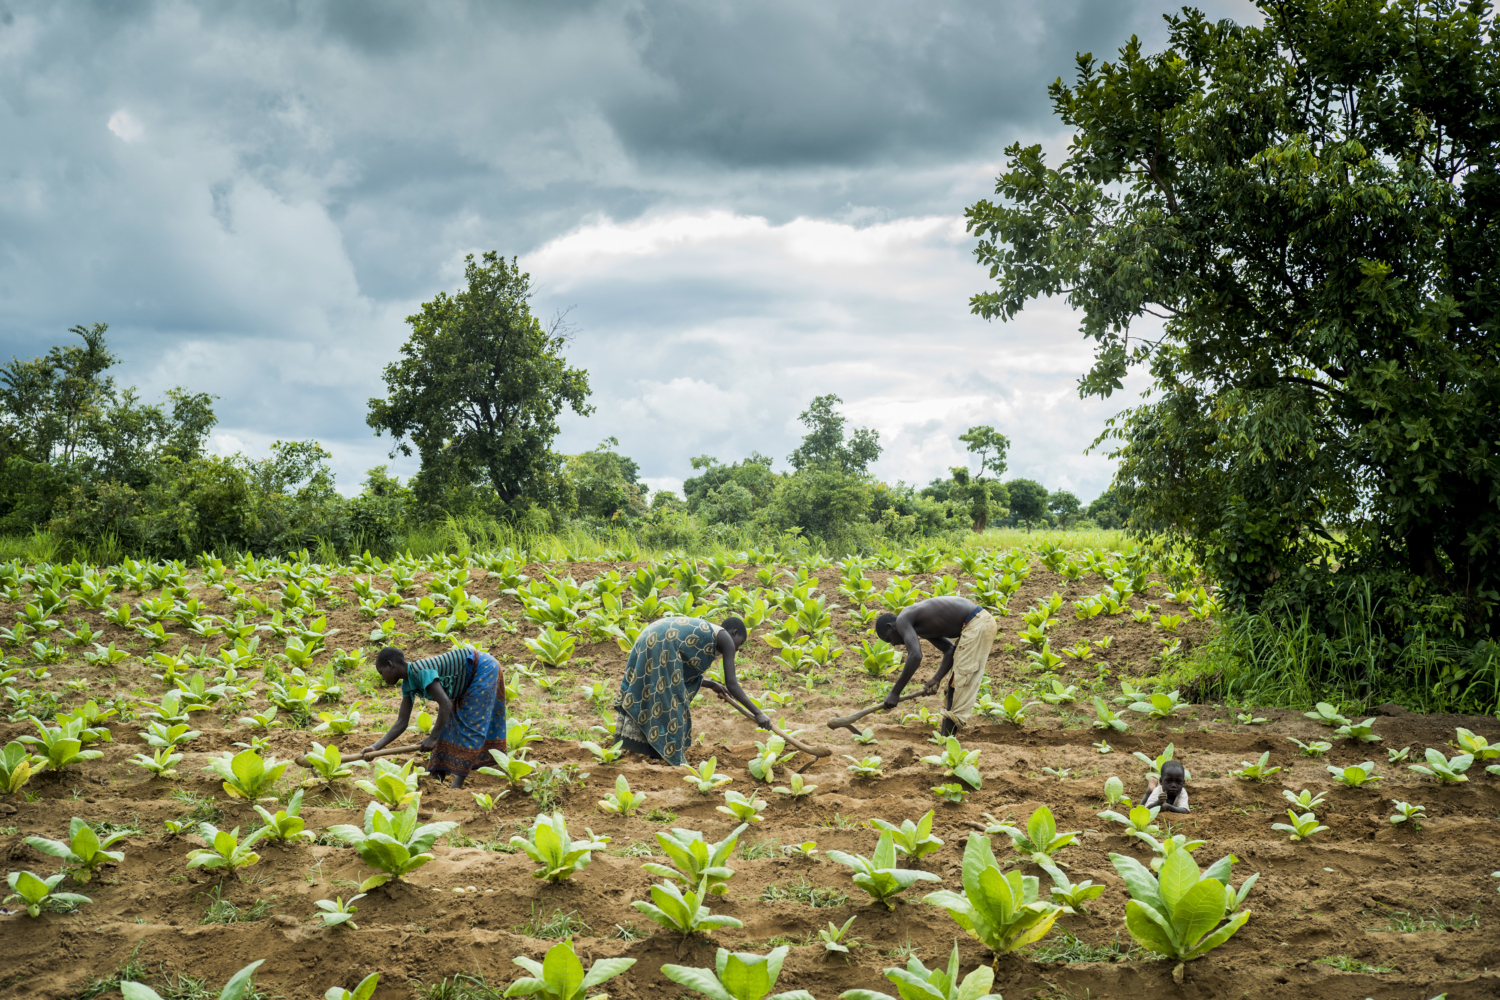 Residents of the farm, including Tiyamike Phiri, an orphaned child labourer, left, at work on a tobacco plot belonging to her brother’s family. Photograph by David Levene.